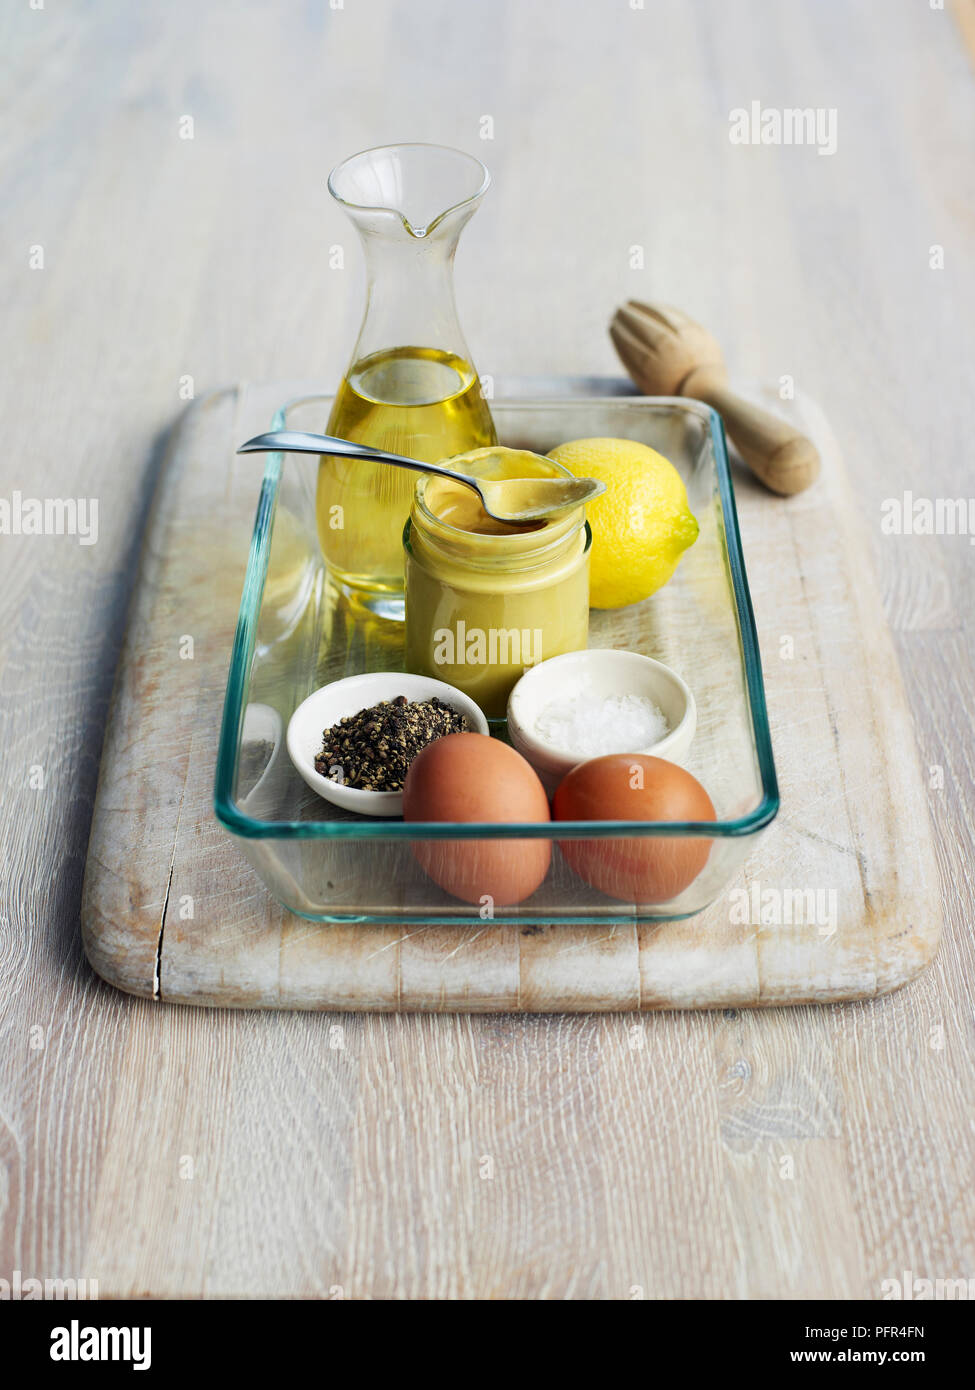 Ingredients for making mayonnaise sauce, wood background Stock Photo